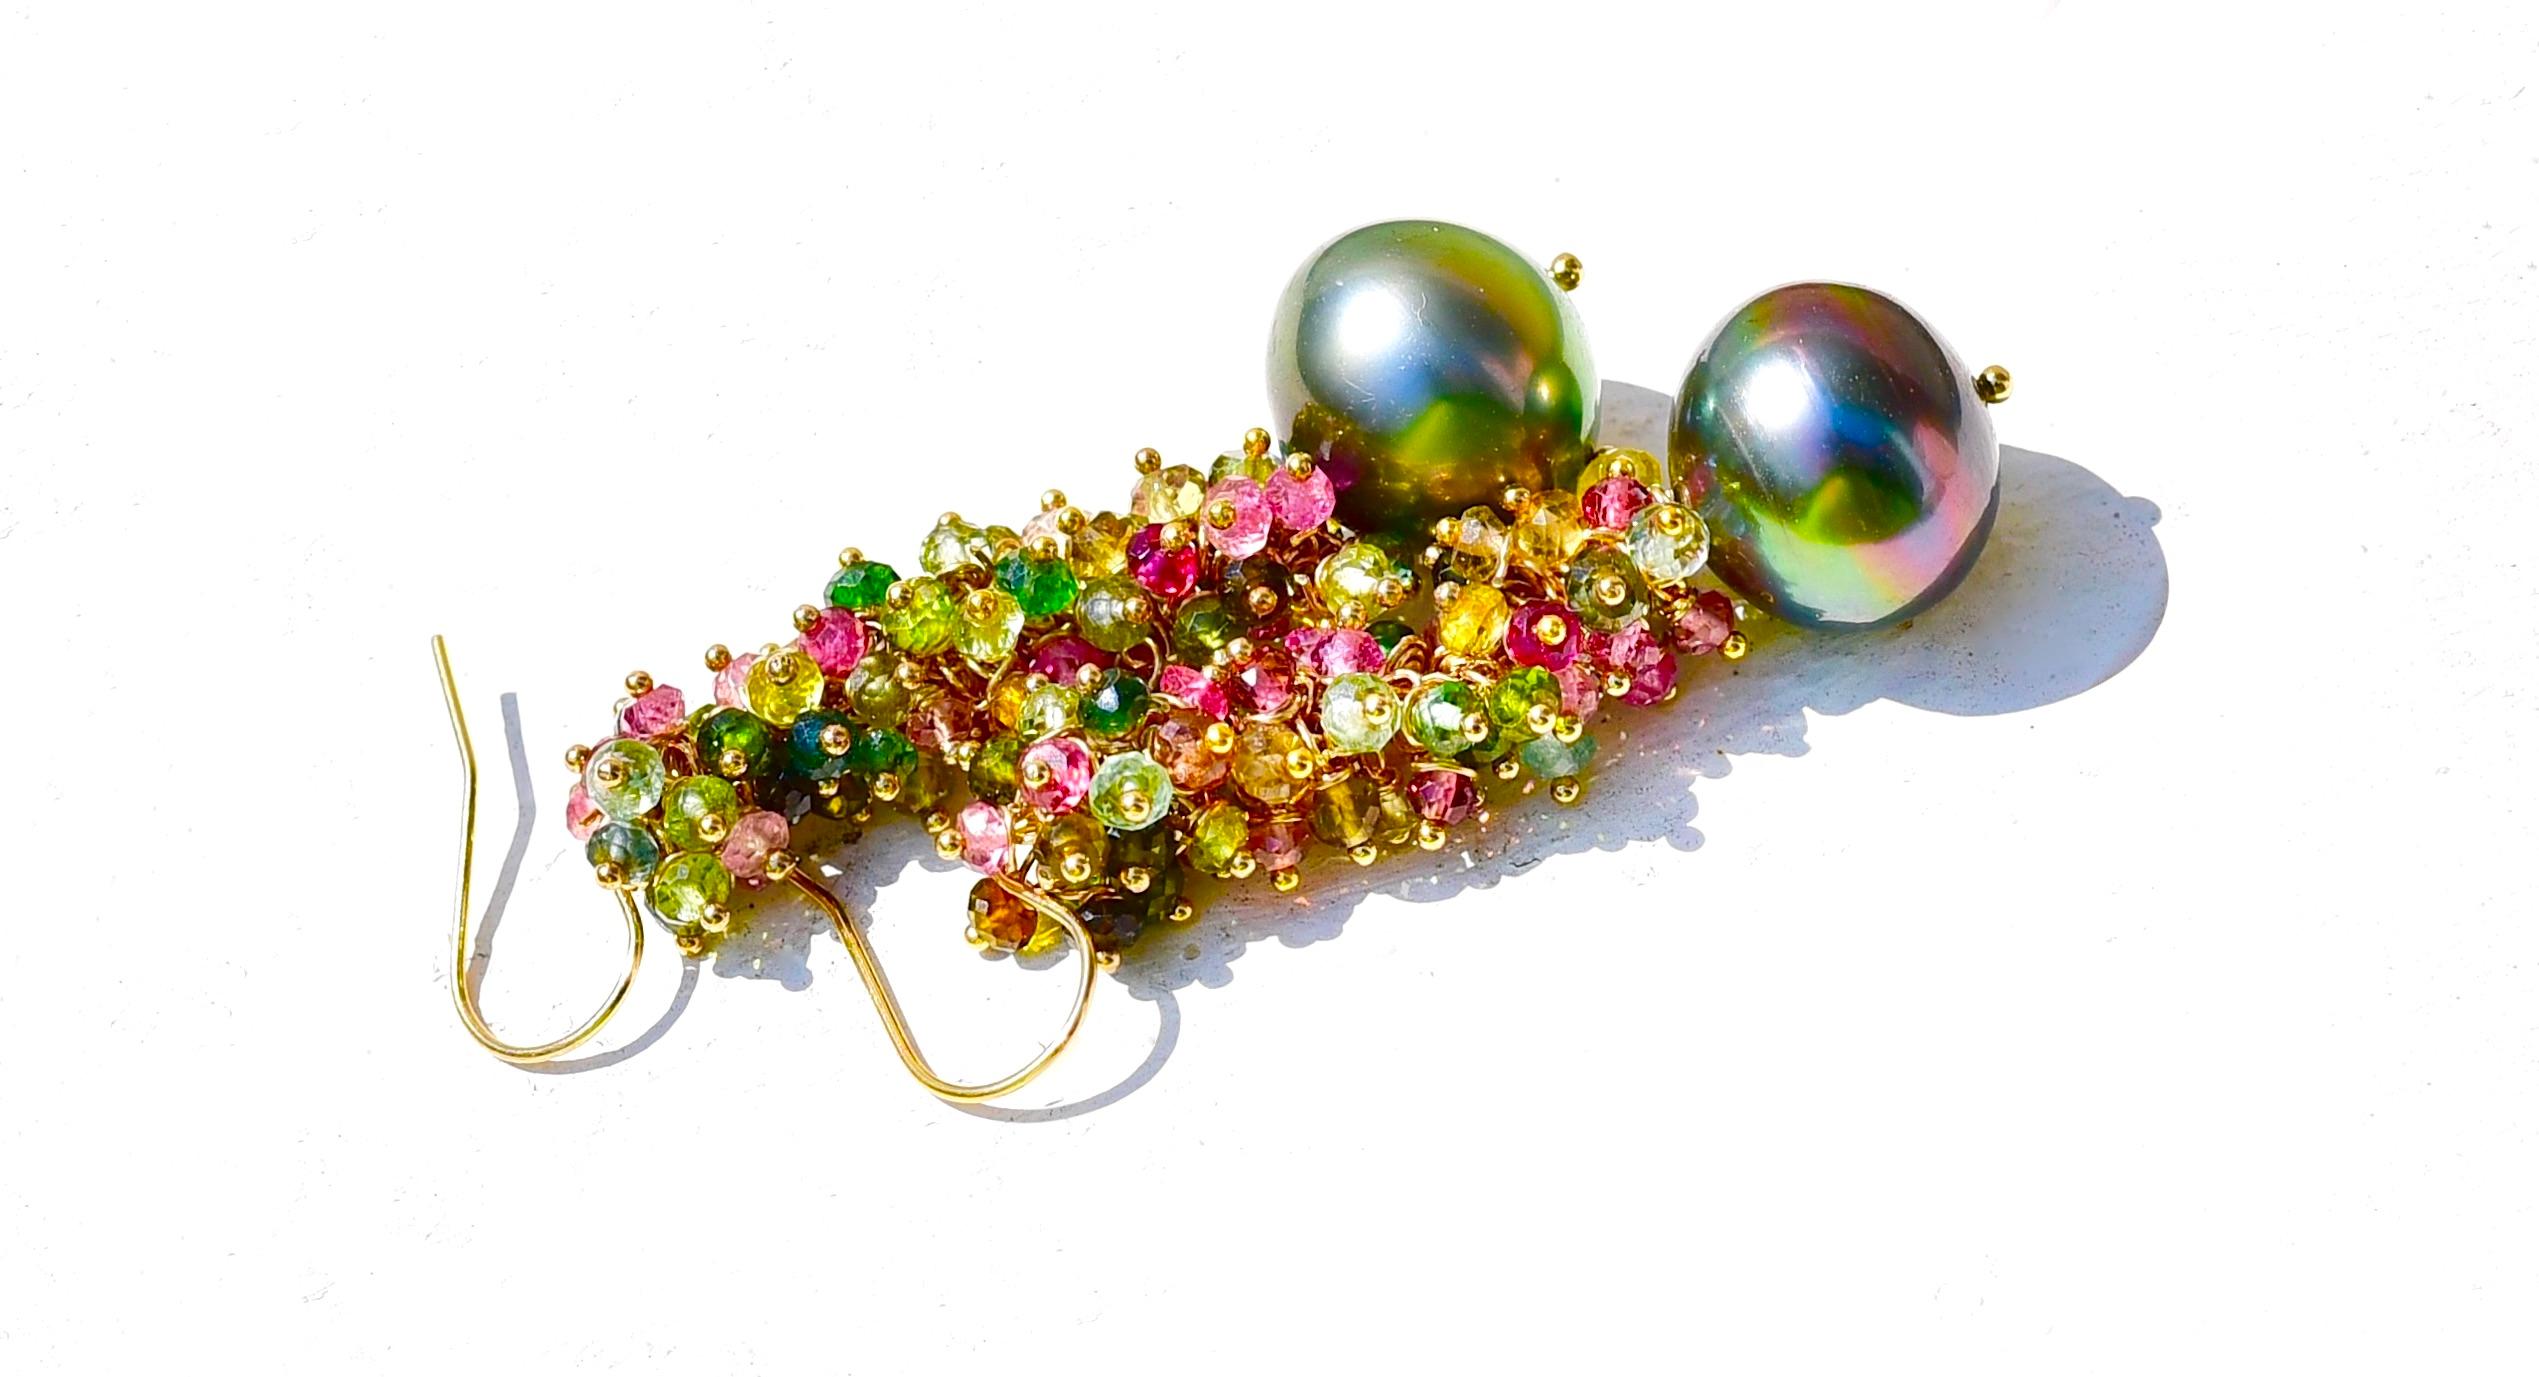 Strong and bold peacock Tahitian south sea pearl (13mm x 14,2mm) has been topped with multi-colored tourmalines. These earrings would be gorgeous in the Fall and Winter seasons when the weather is colorful and crisp. Rich look for special days!